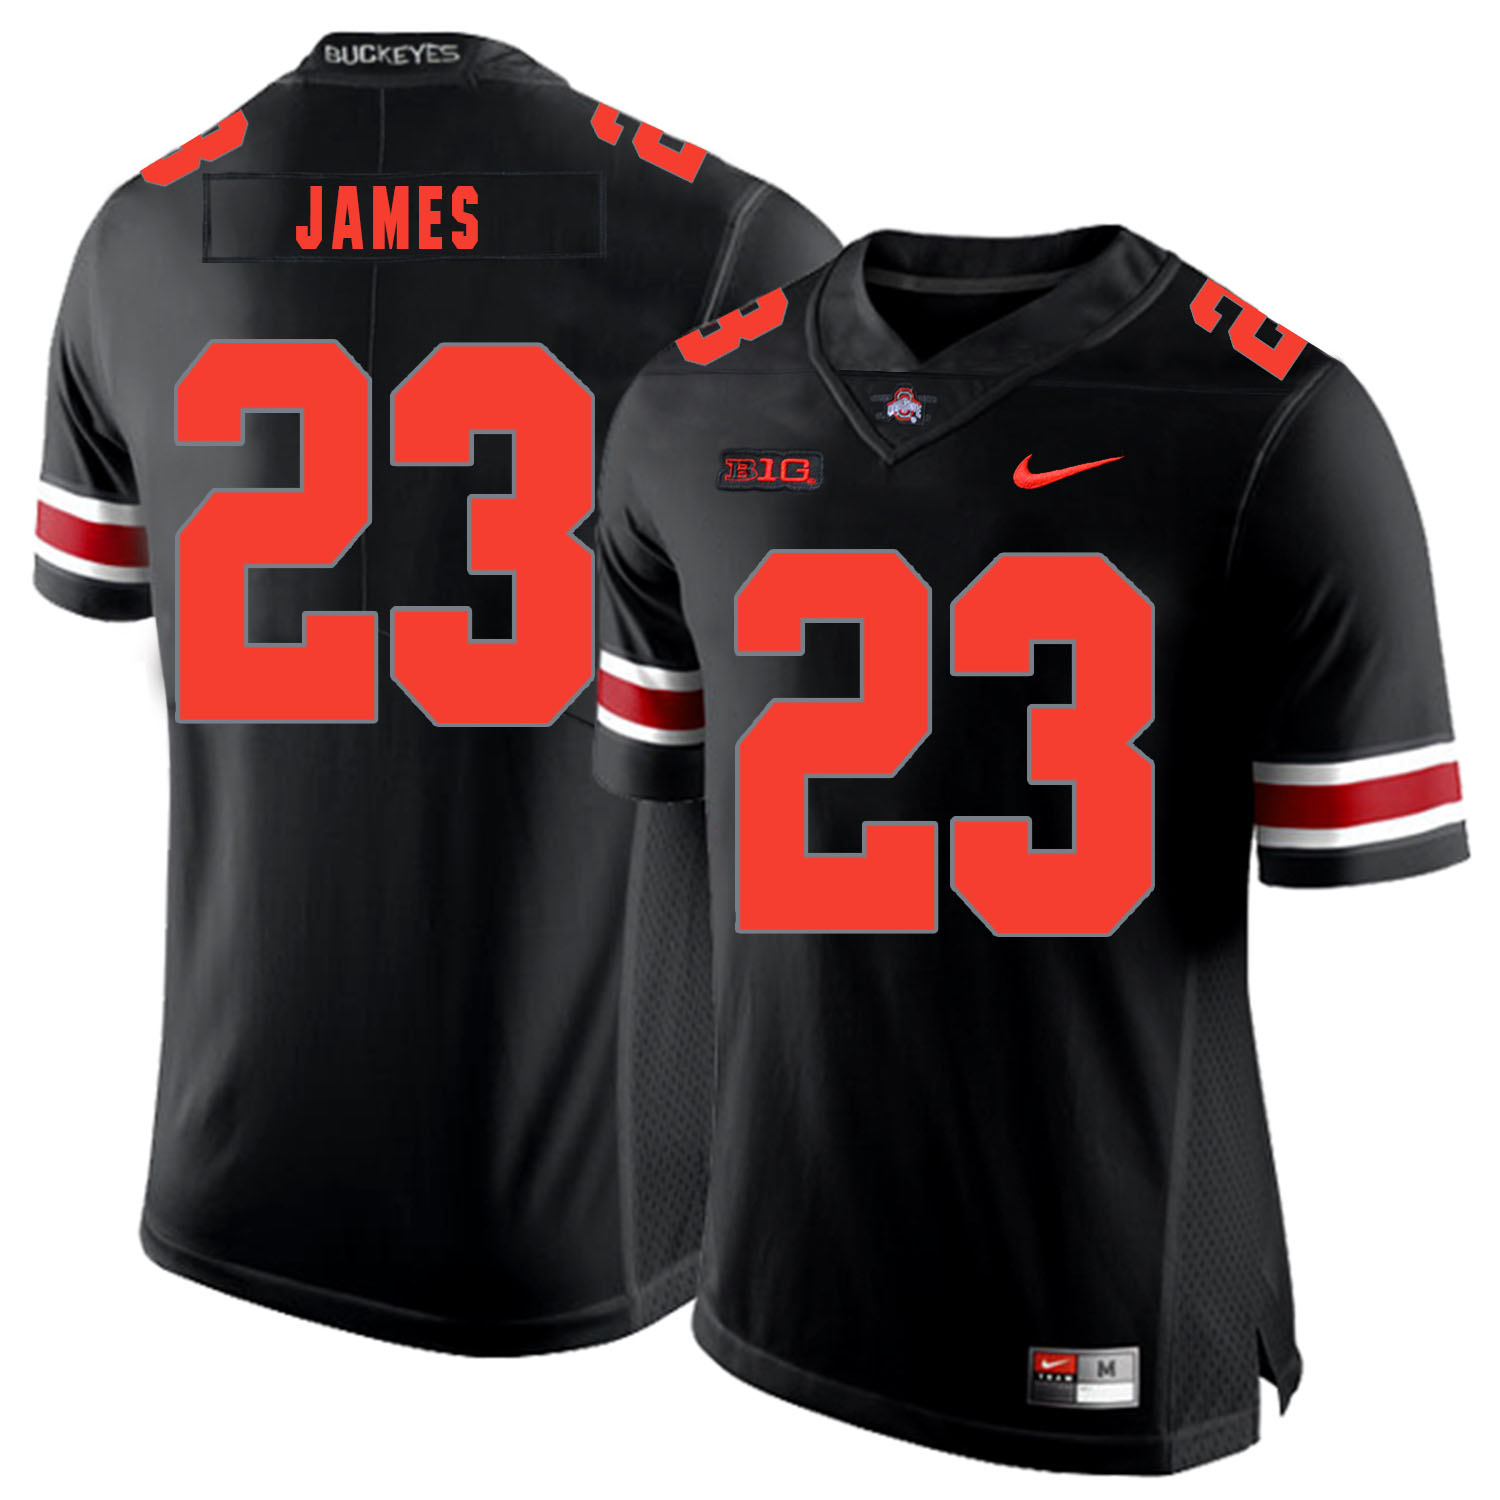 Ohio State Buckeyes 23 Lebron James Black Shadow Nike College Football Jersey - Click Image to Close